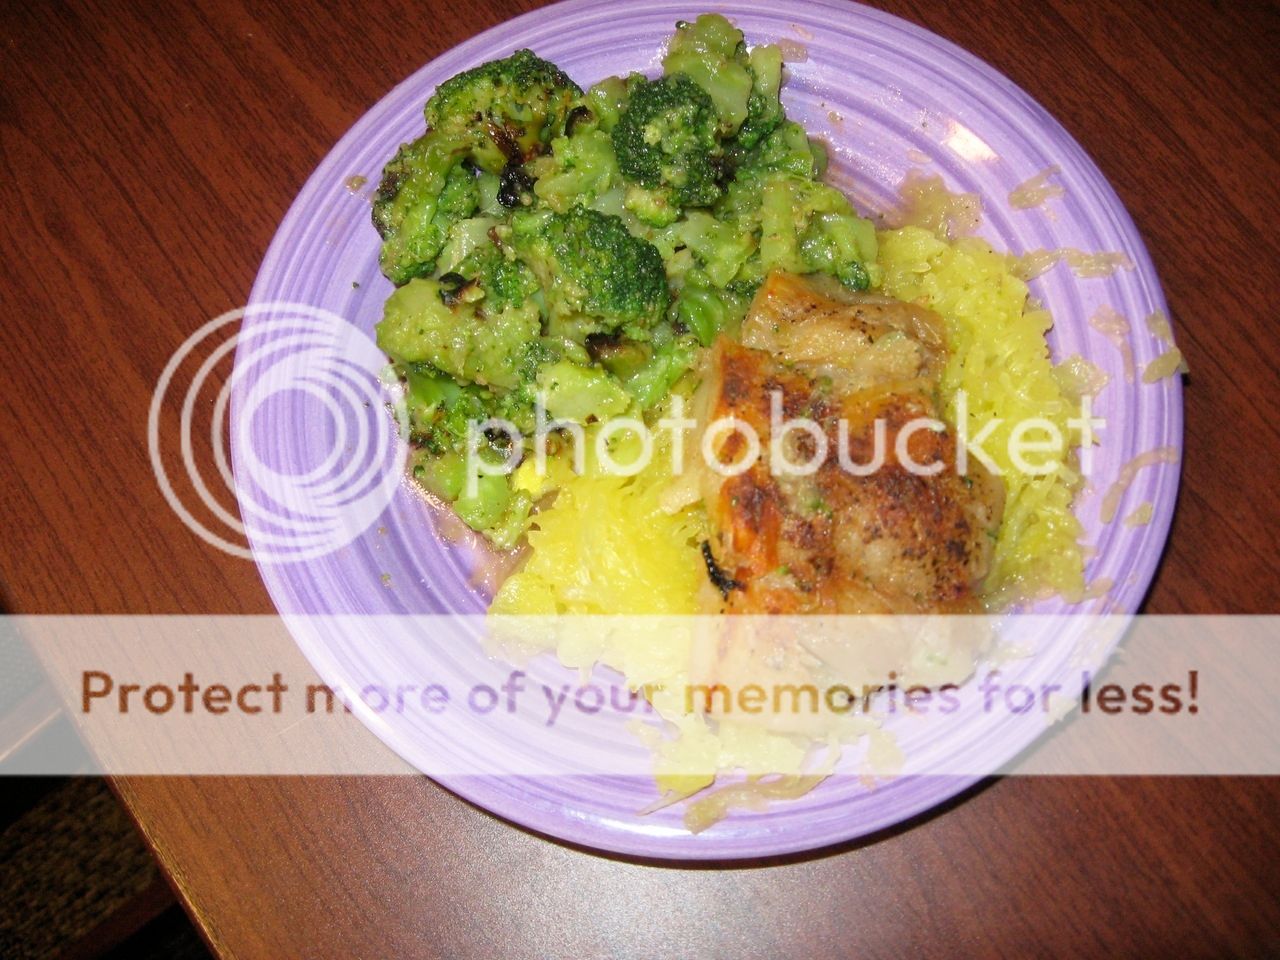 Broiled Cod on a bed of Spaghetti Squash with a side of steamed broccoli